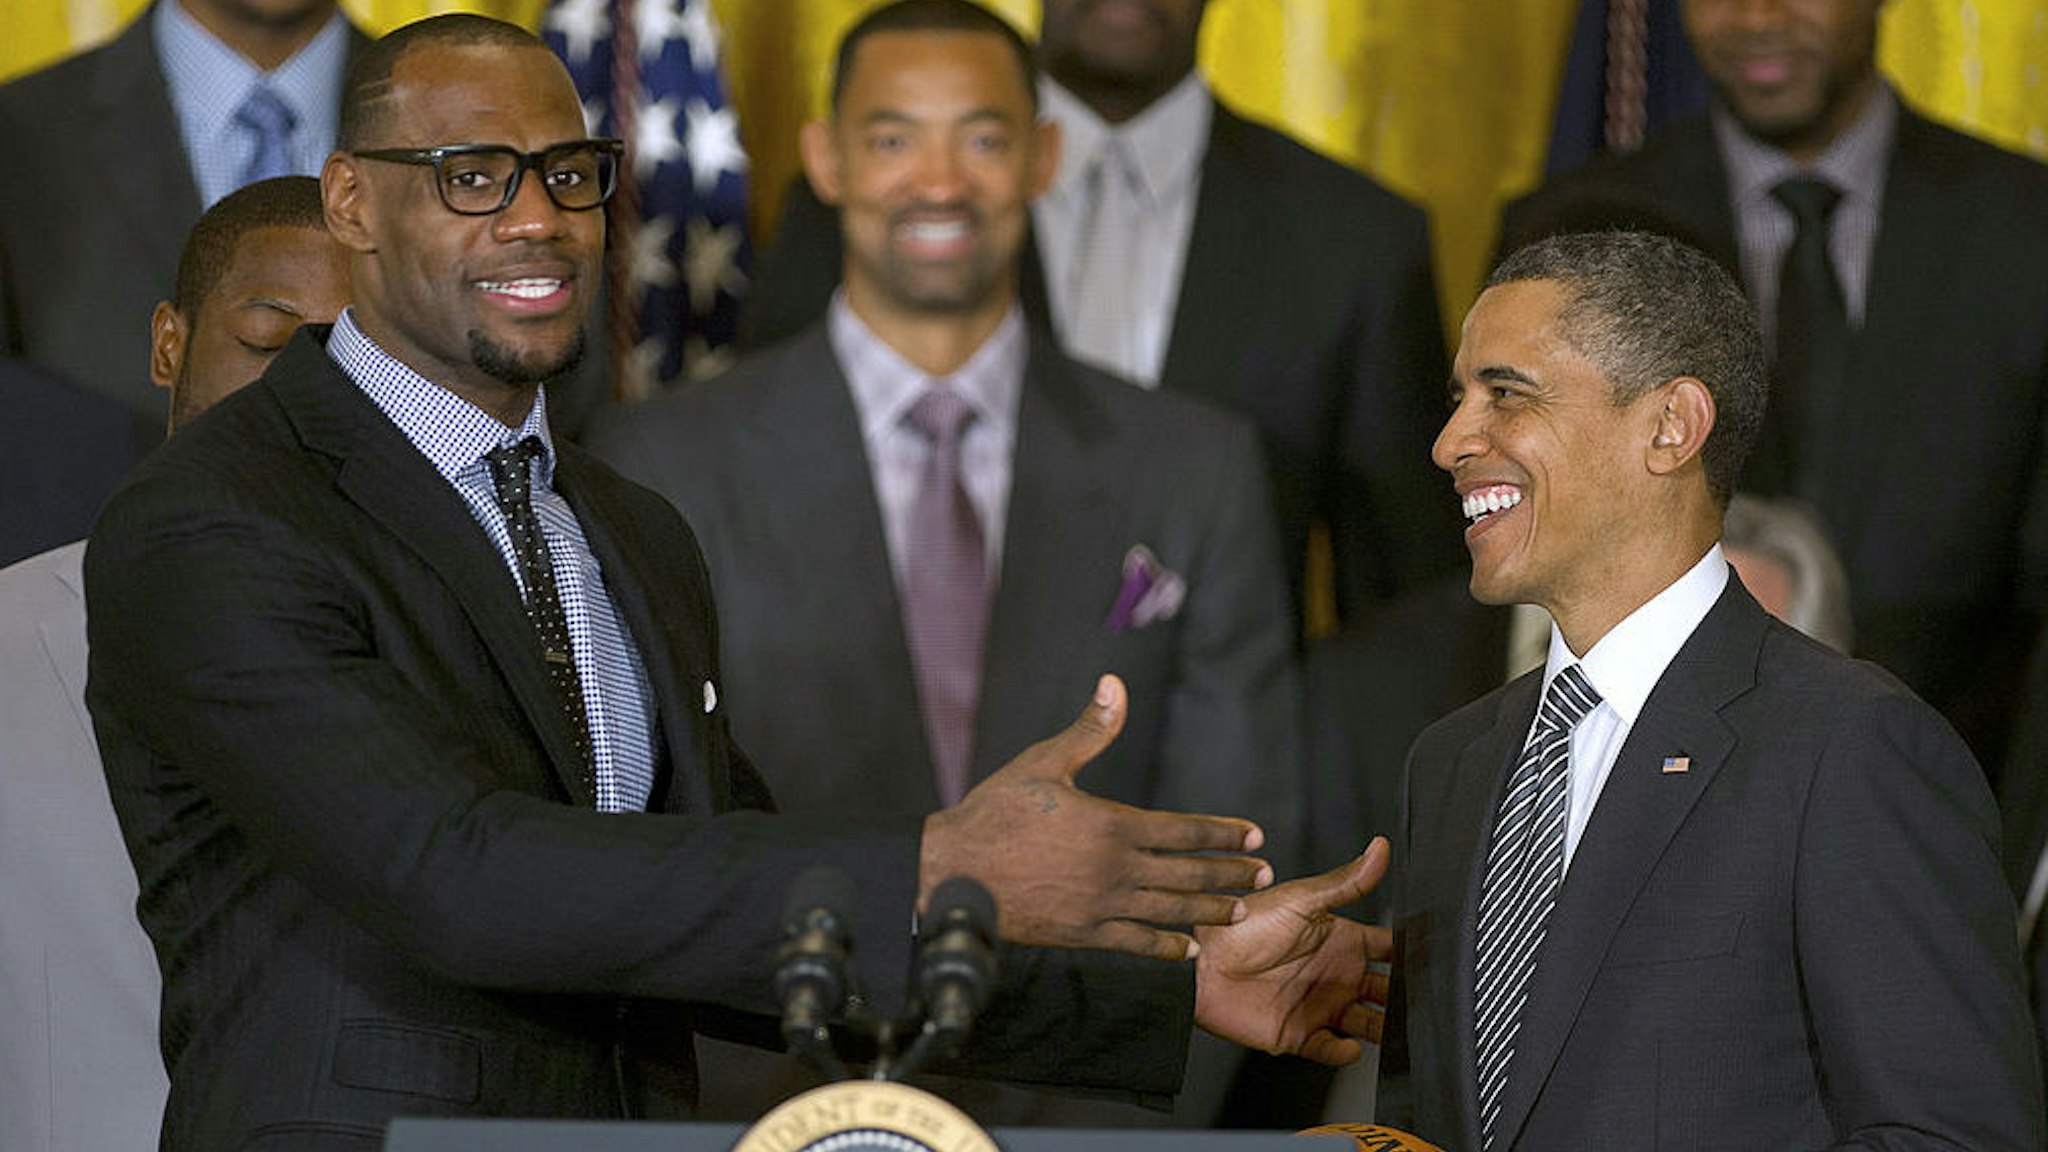 US President Barack Obama (R) poses with LeBron James as he welcomes the NBA Champion Miami Heat to the White House to honor the team and their 2012 NBA Championship victory at the White House in Washington, DC, January 28, 2013. (Jim Watson/AFP via Getty Images)